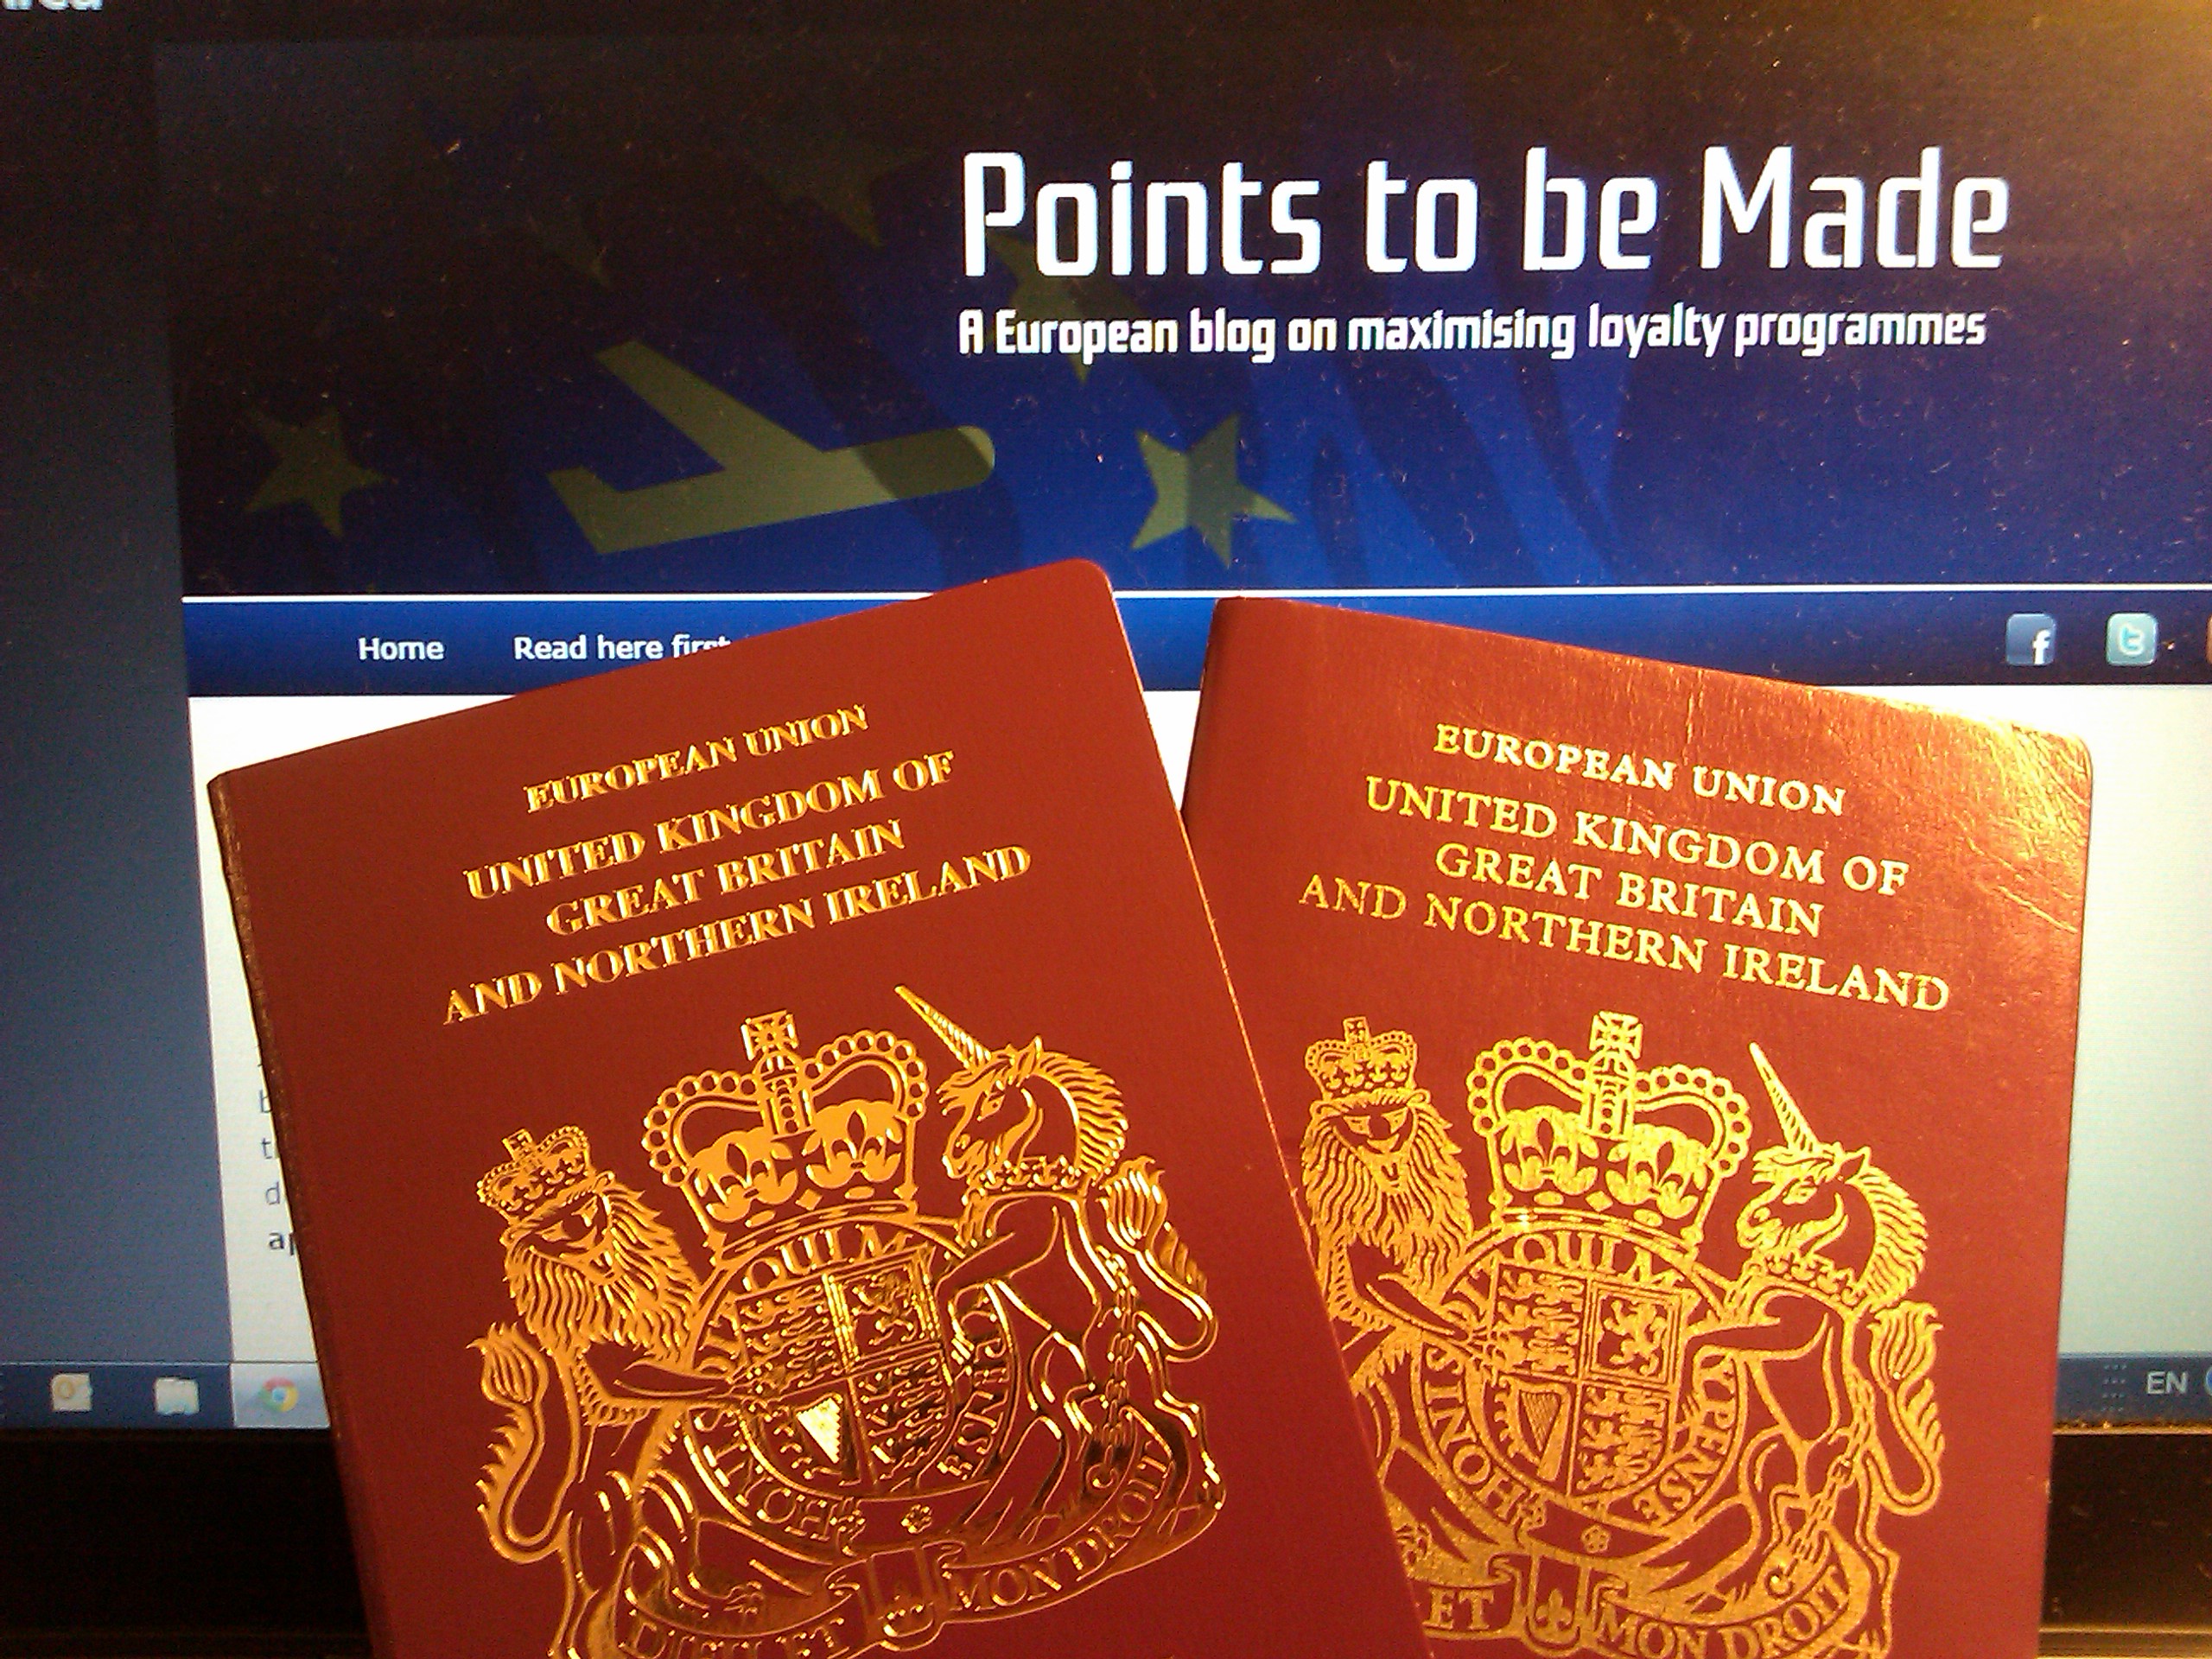 My experience getting a second UK passport using the Premium Service.